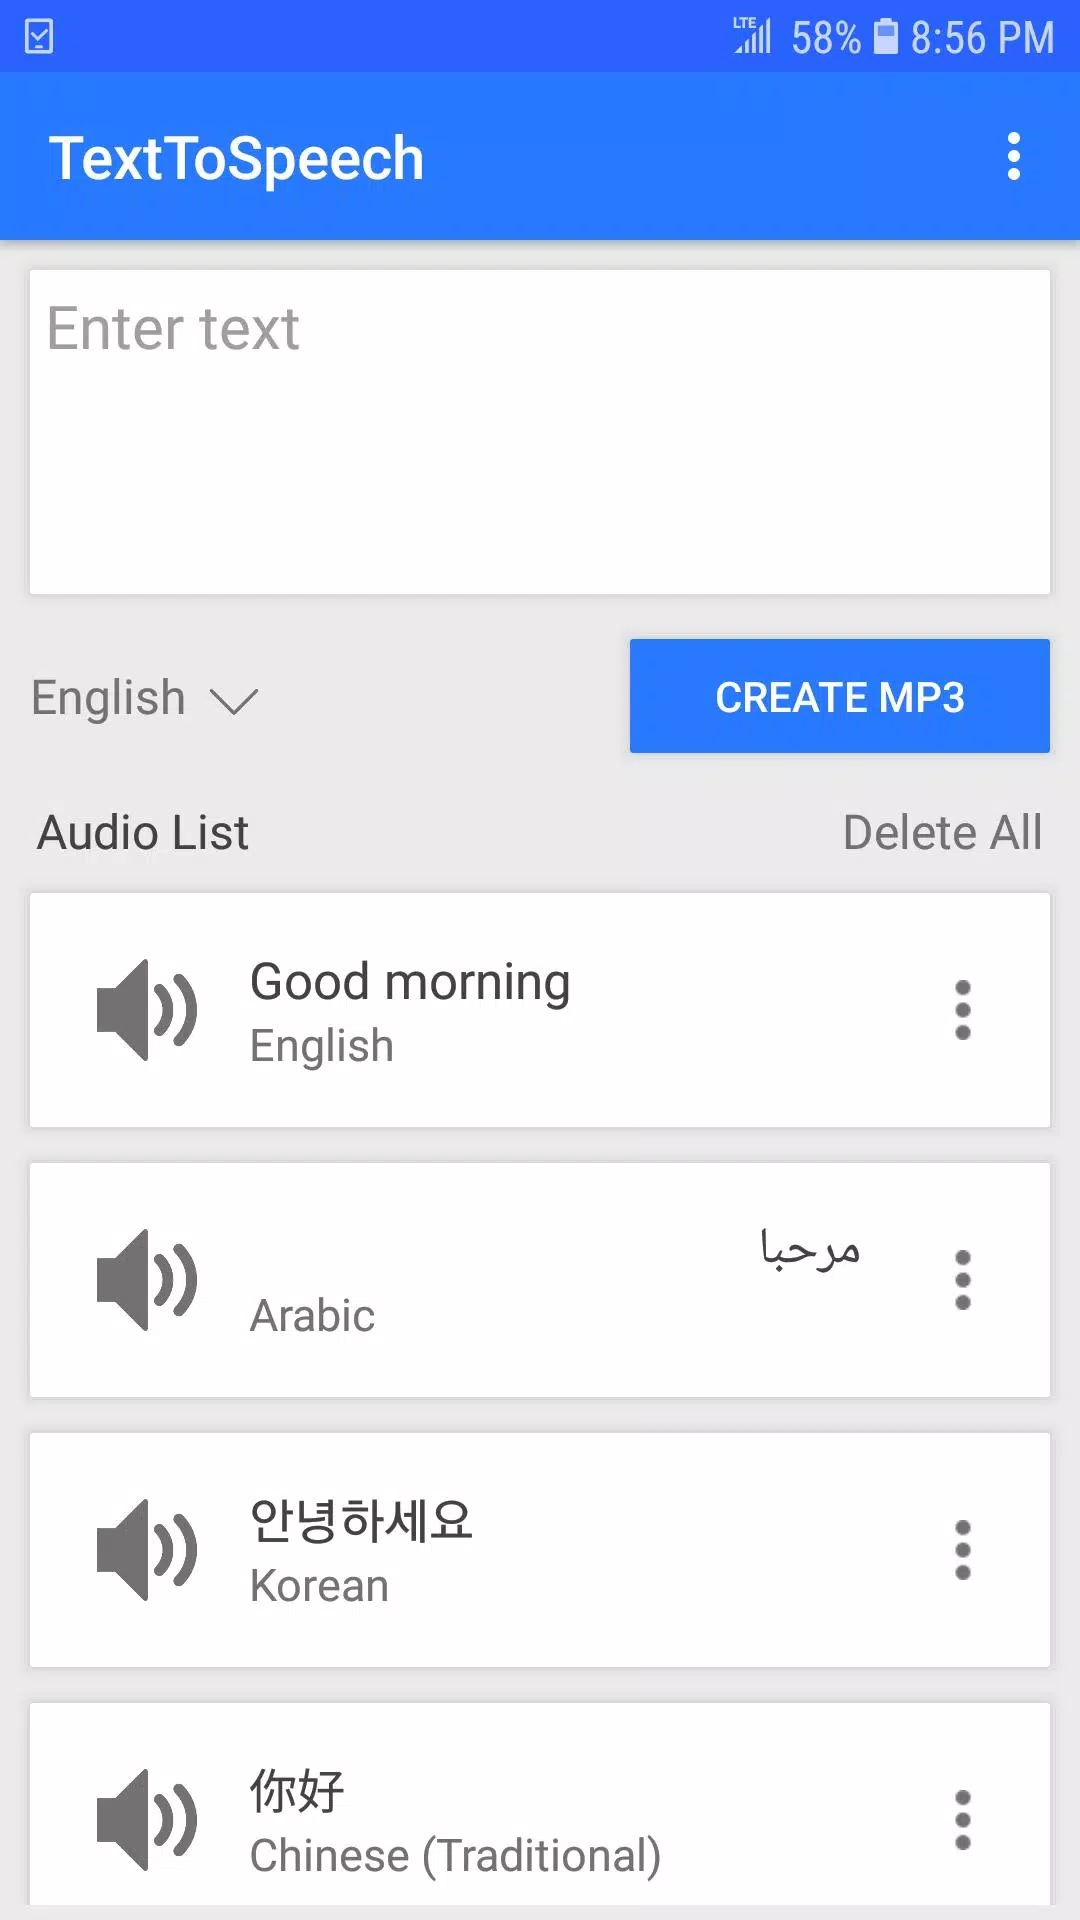 Download do APK de Text to Speech (MP3 download) para Android